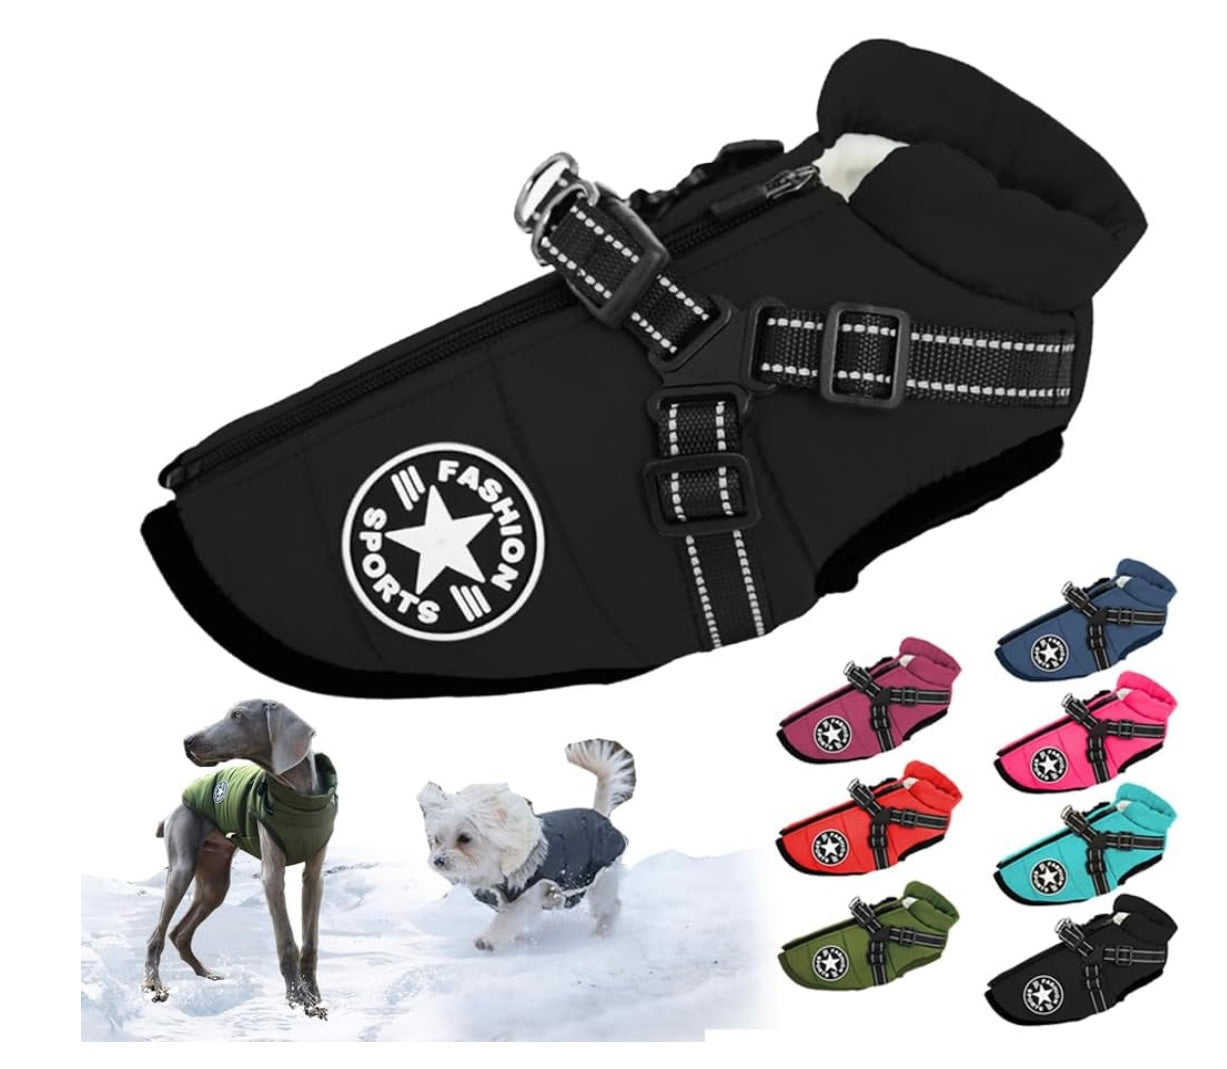 Pawbibi Sport - Windproof Winter Jacket with Built-in Harness